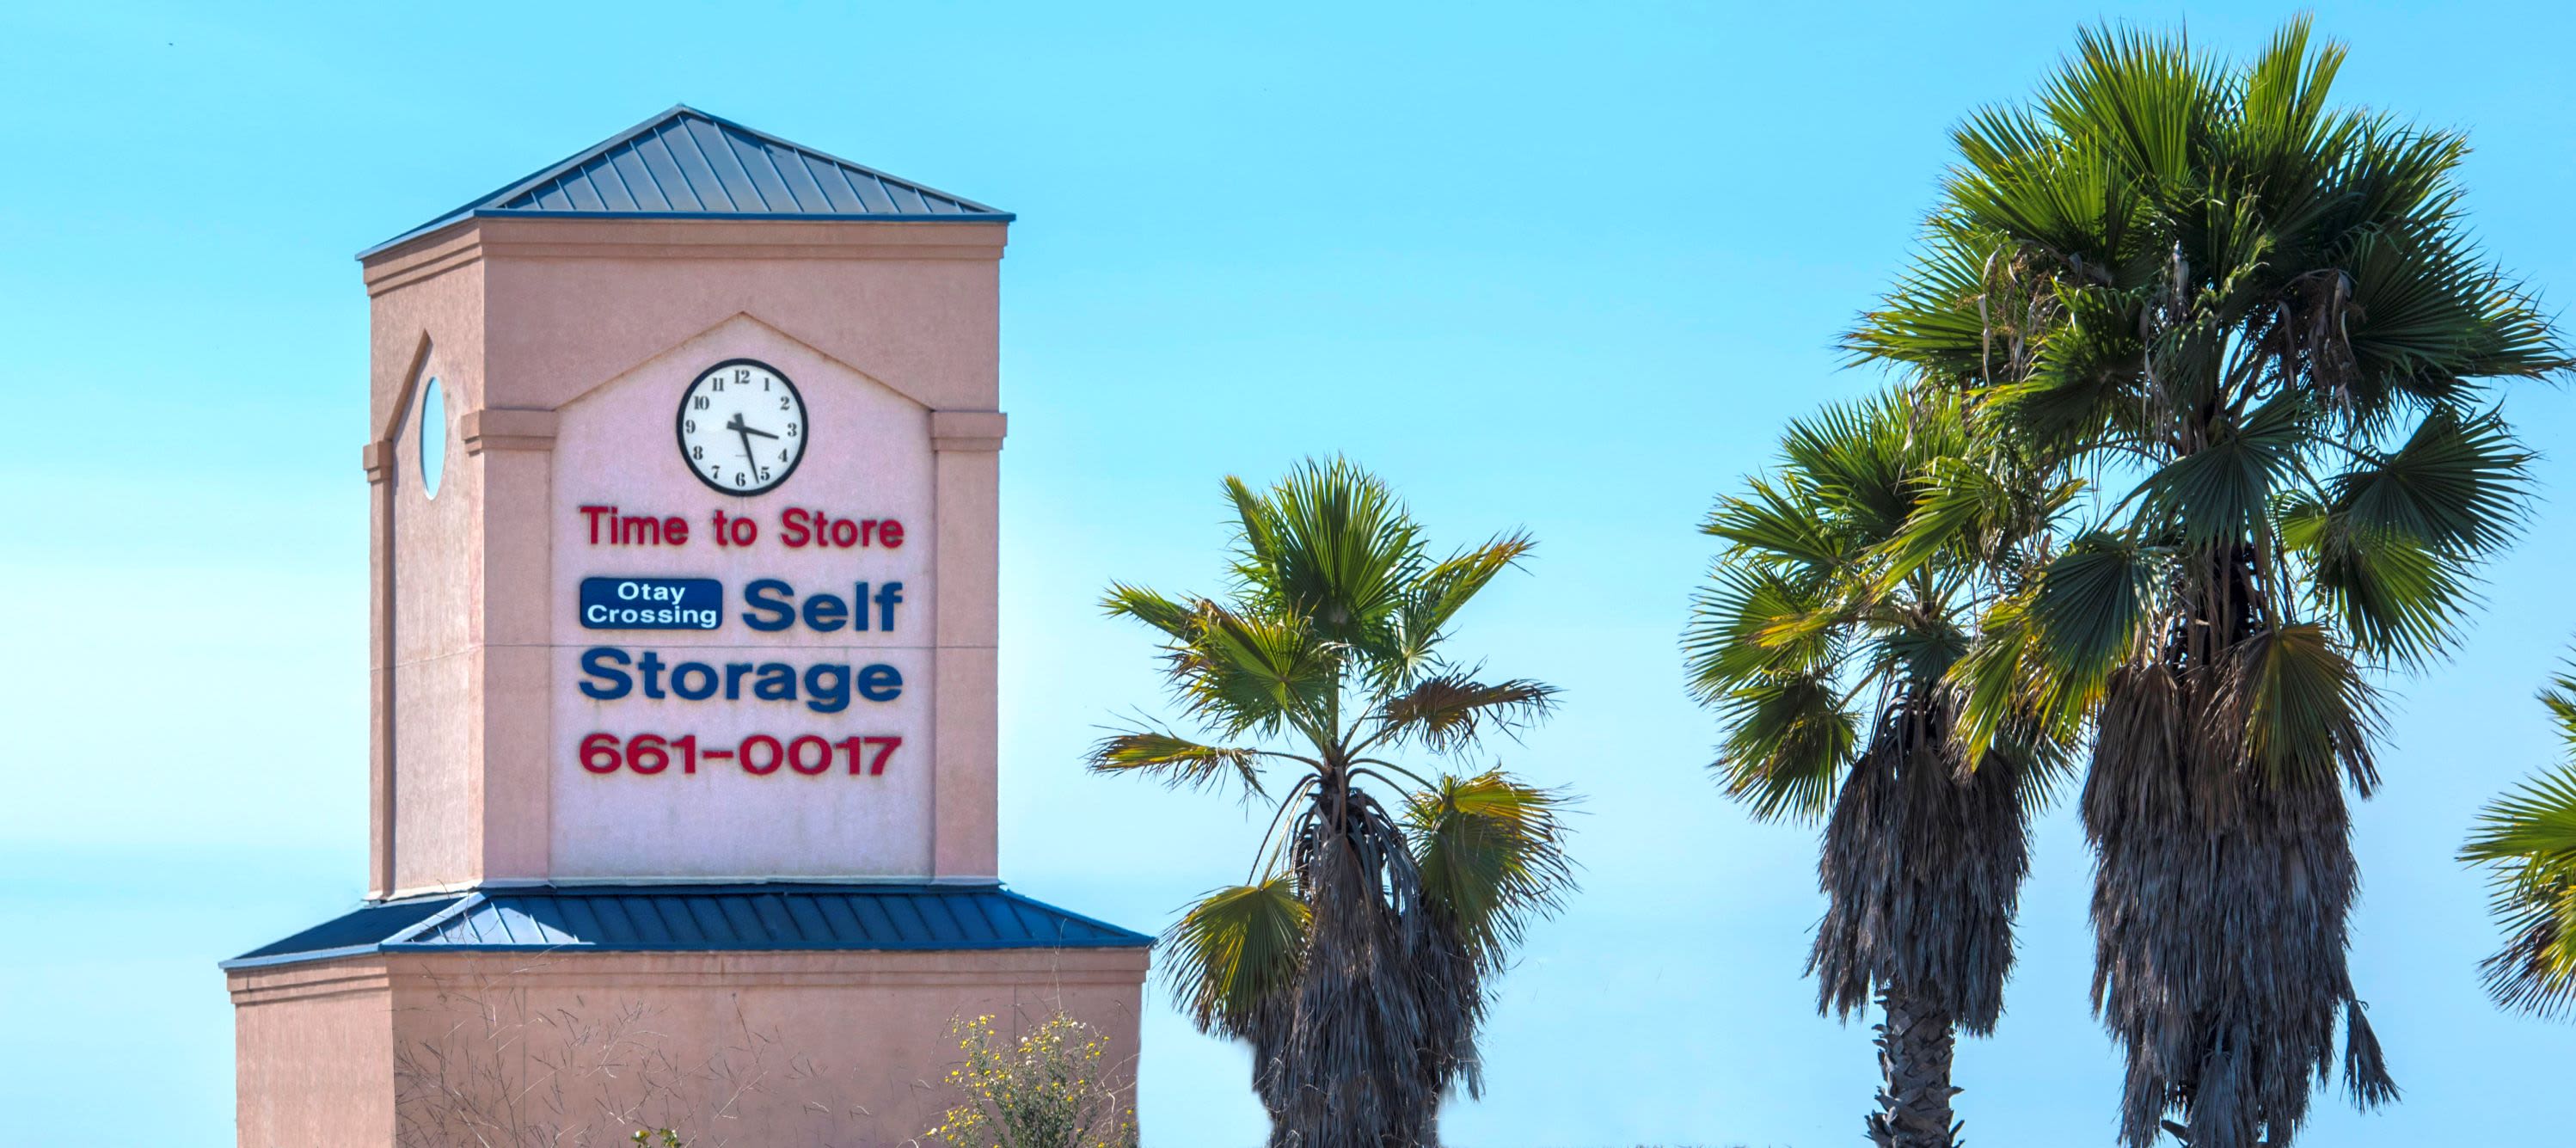 Facility tower at Otay Crossing Self Storage in San Diego, CA